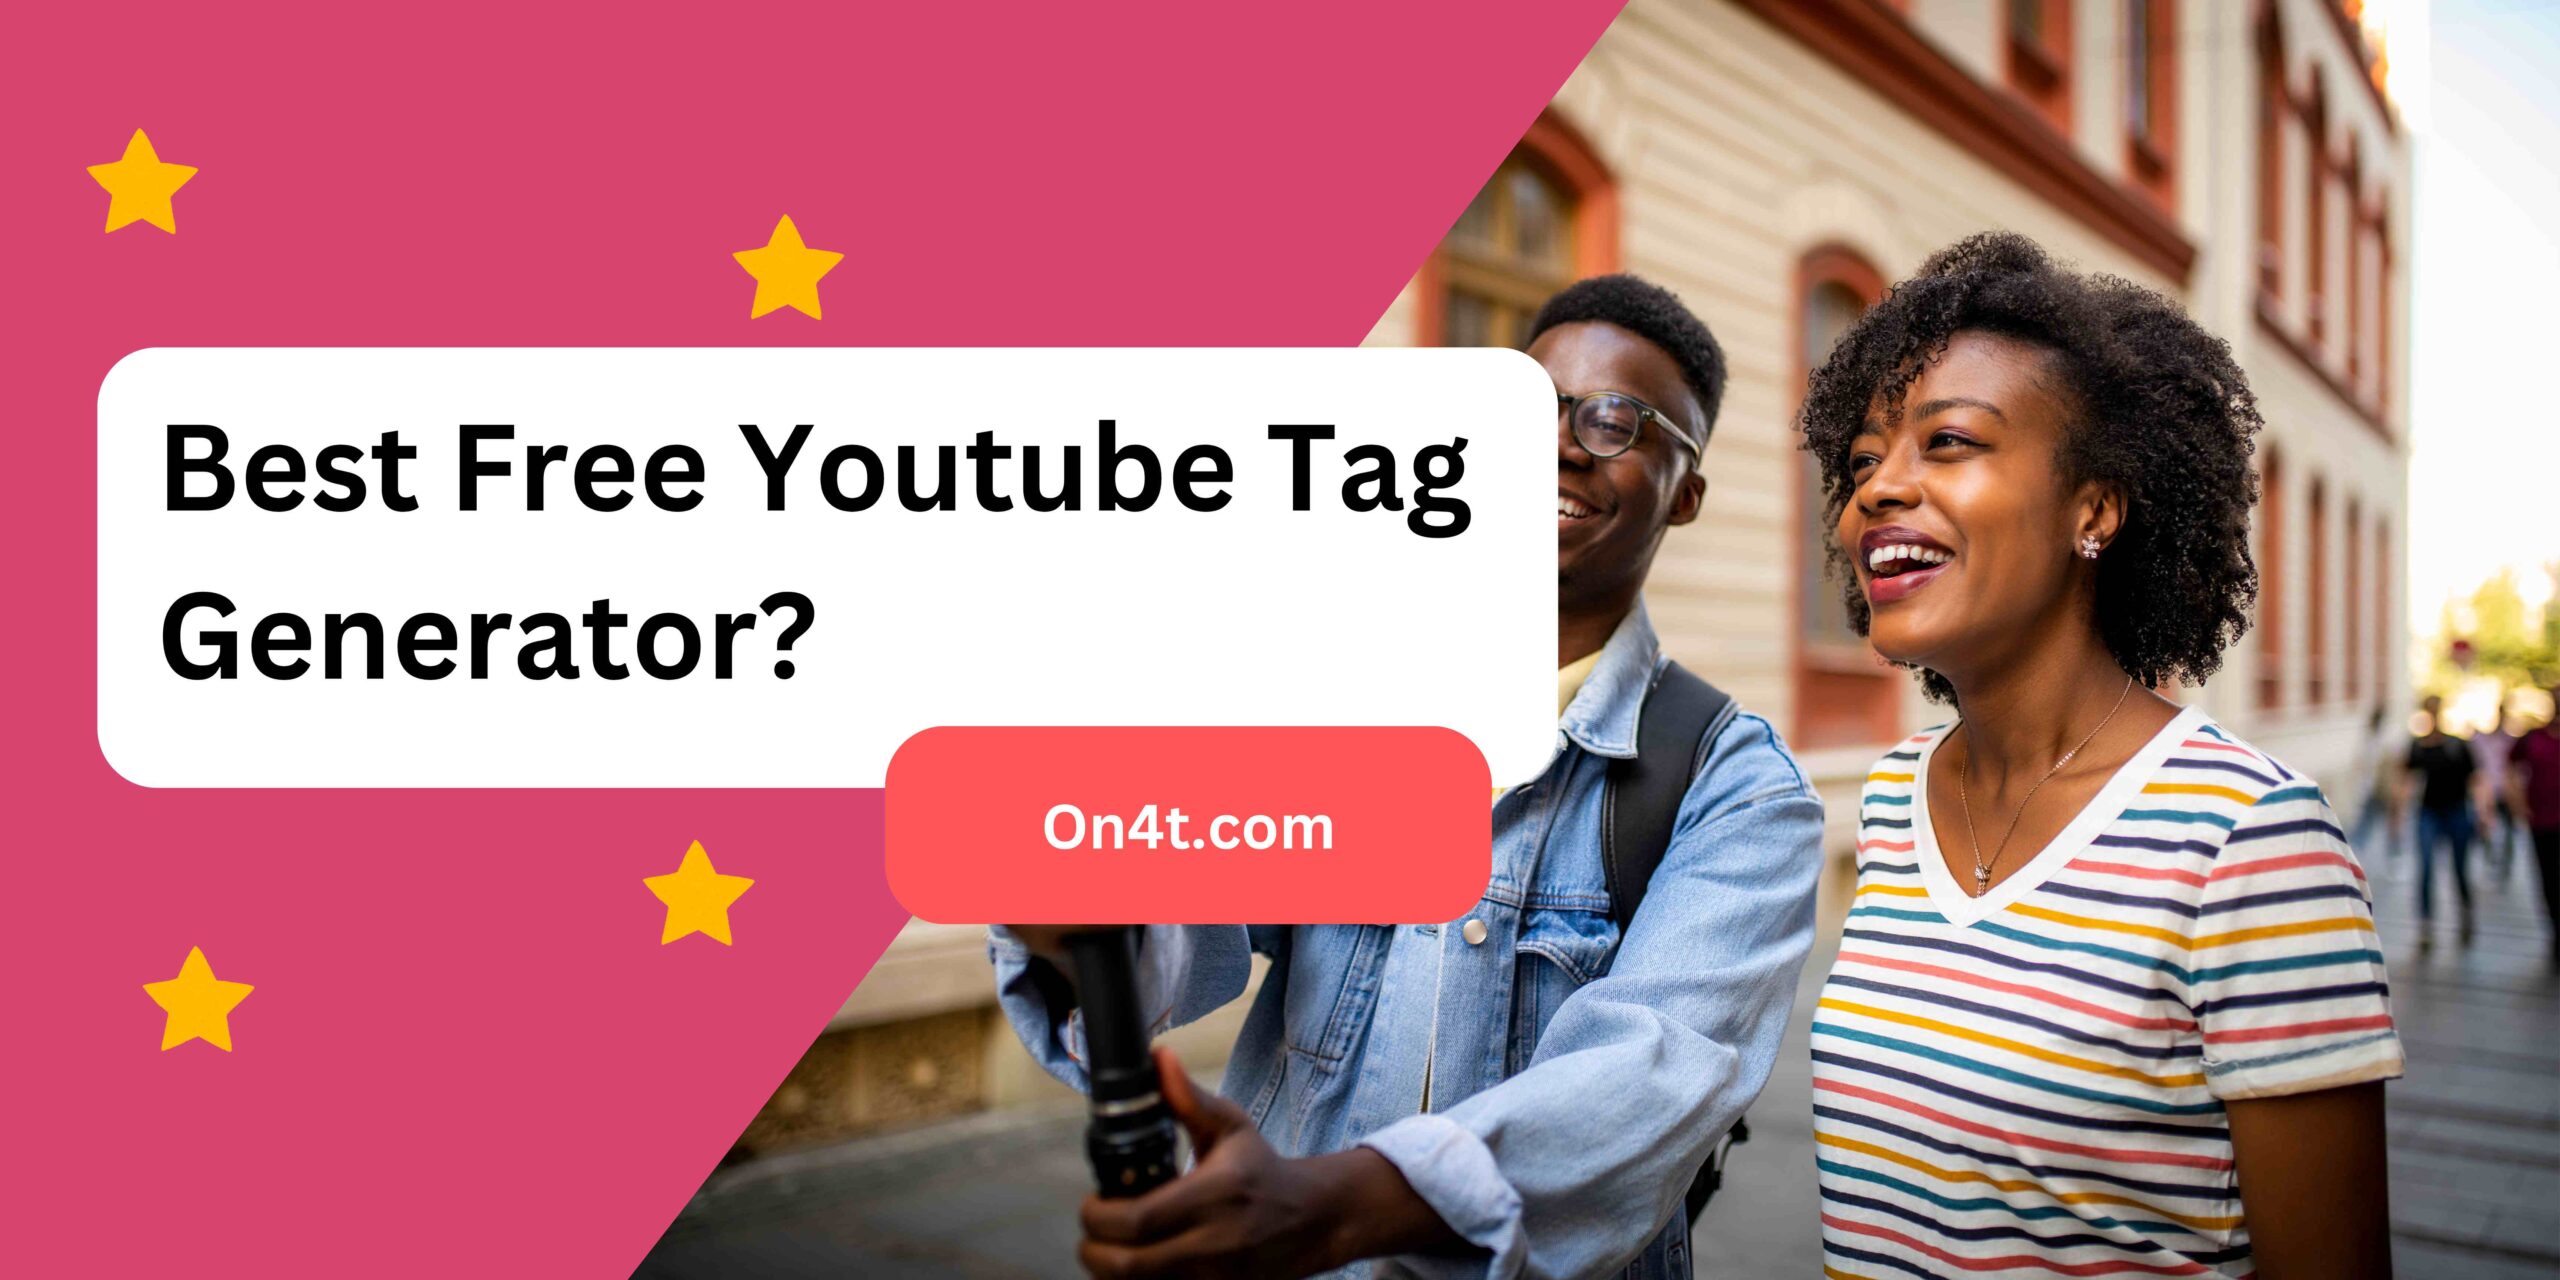 Best Free Youtube Tag Generator?